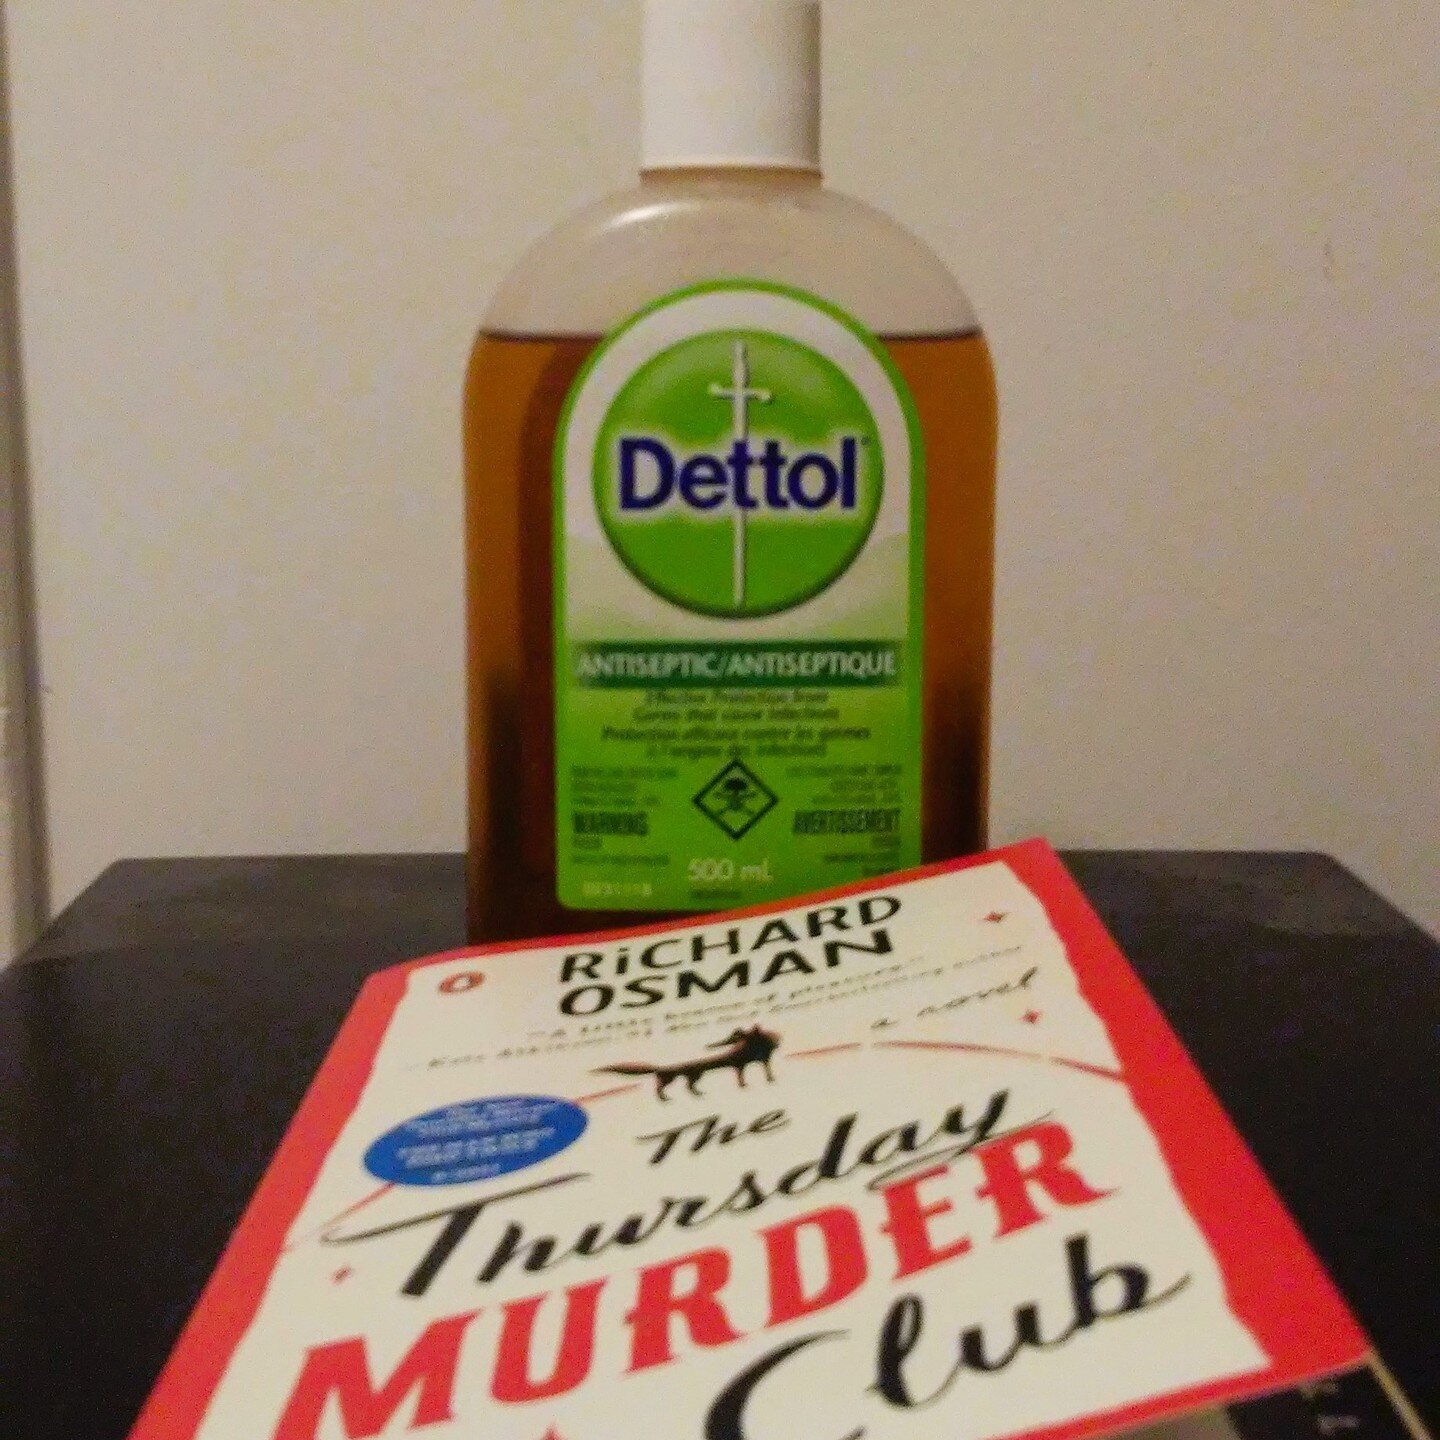 The Thursday Murder Club by Richard Osman

&quot;The journey passes very pleasantly. The sun is up, the skies are blue, and murder is in the air.&quot;

#thursdaymurderclub
#richardosman
#tuesdayclubmurders 
#penguin